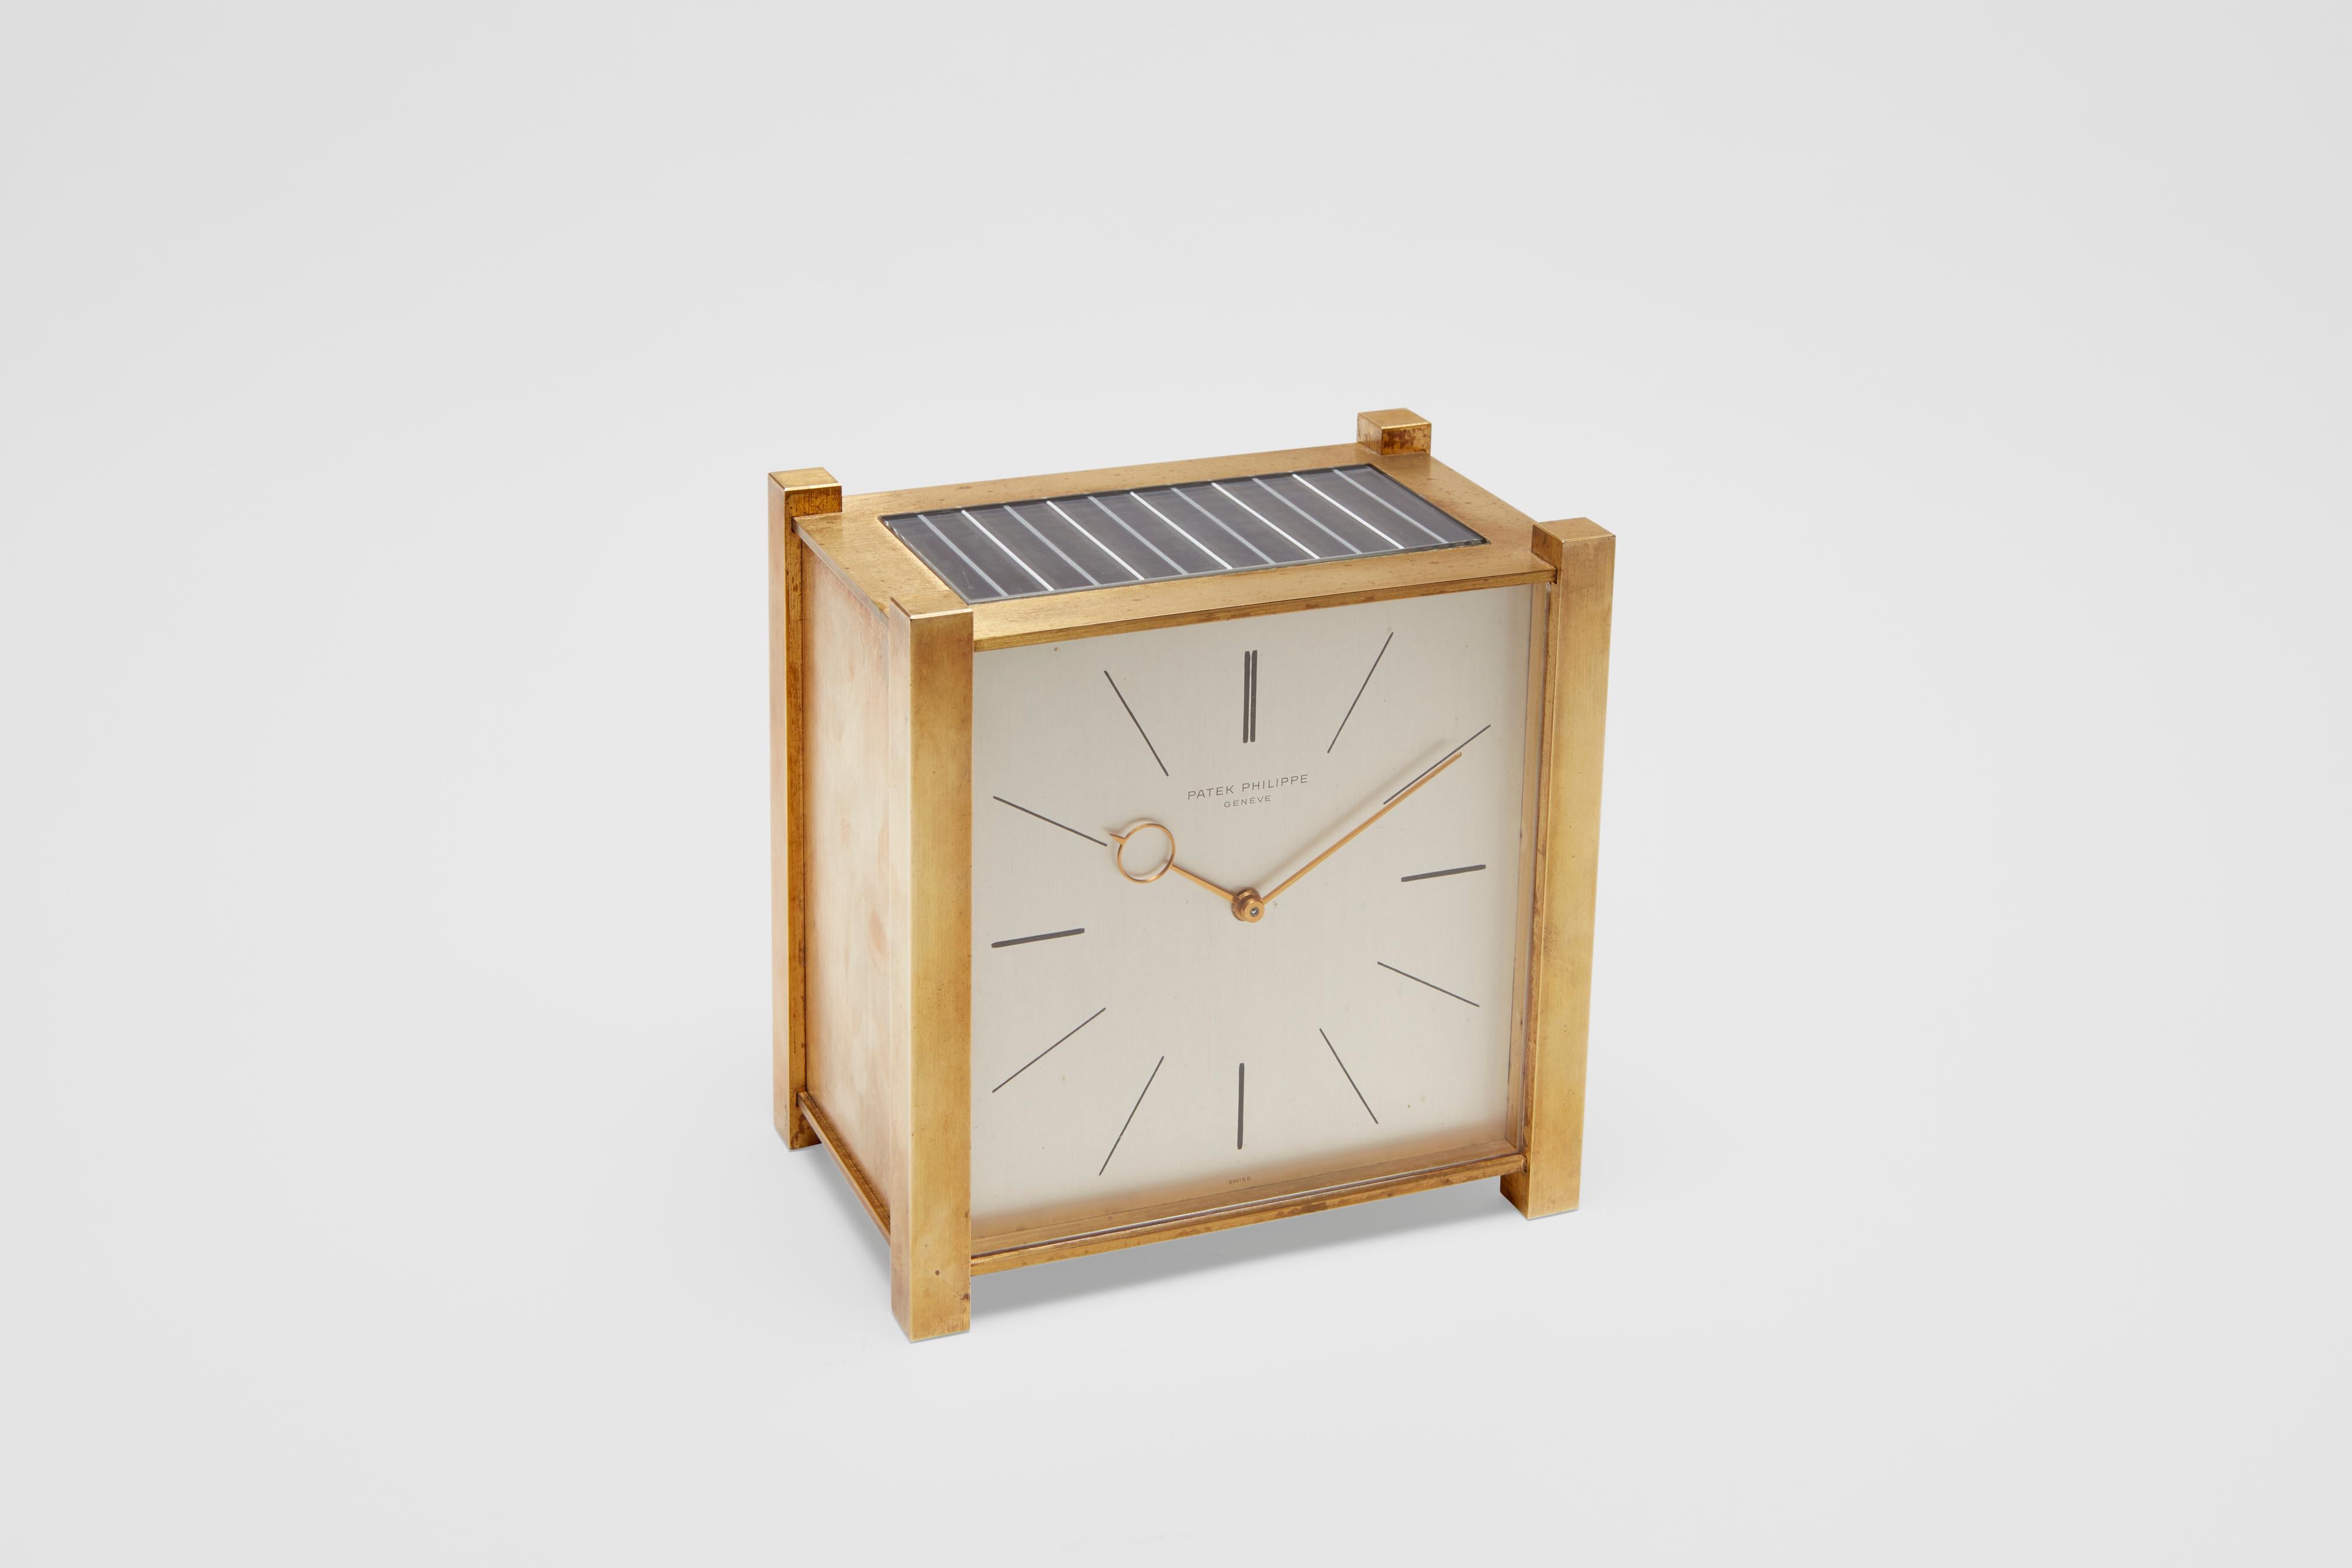 A gilt metal solar powered mantle clock by Patek Philippe. This is a fantastic piece of not only Patek Philippe history but also quite an advanced time keeping instrument for its time. 

Patek began in 1950 with its first 